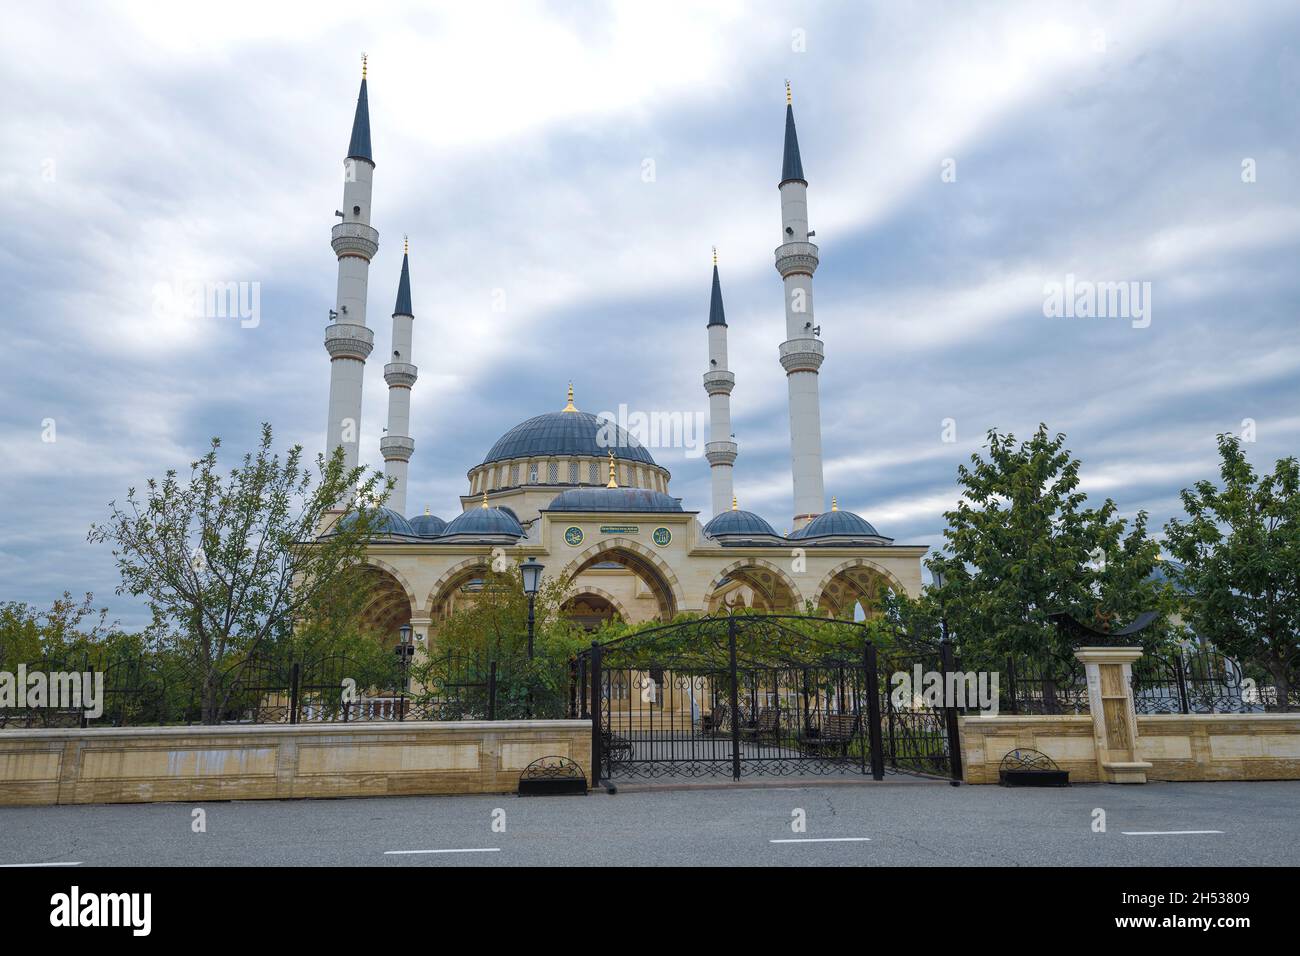 - SEPTEMBER 28, 2021: Sultan Delimkhanov Juma Mosque on a cloudy September day. Stock Photo